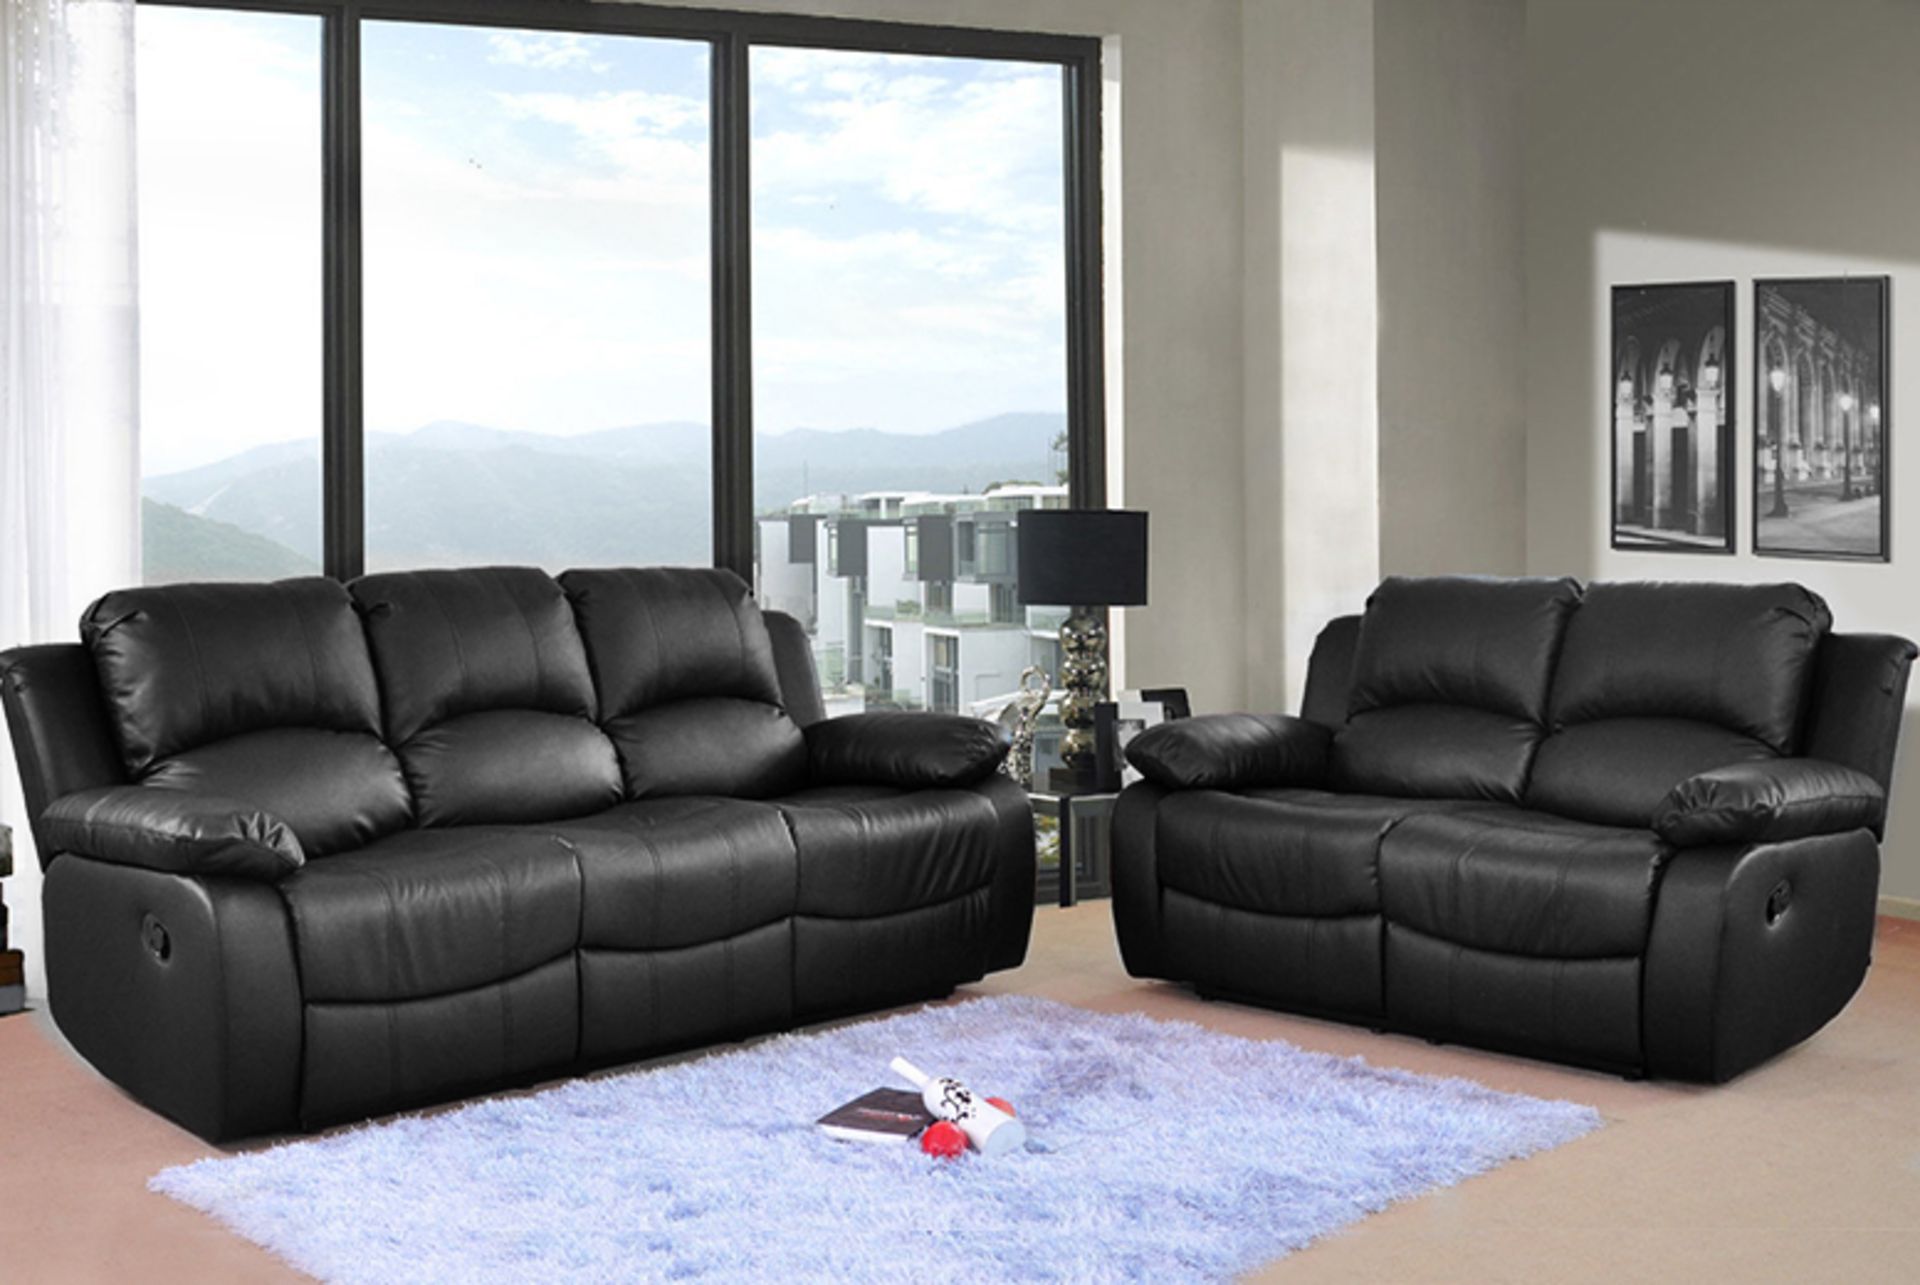 3 SEATER AND 2 SEATER BLACK LEATHER SUPREME VALANCE RECLINING SUITE